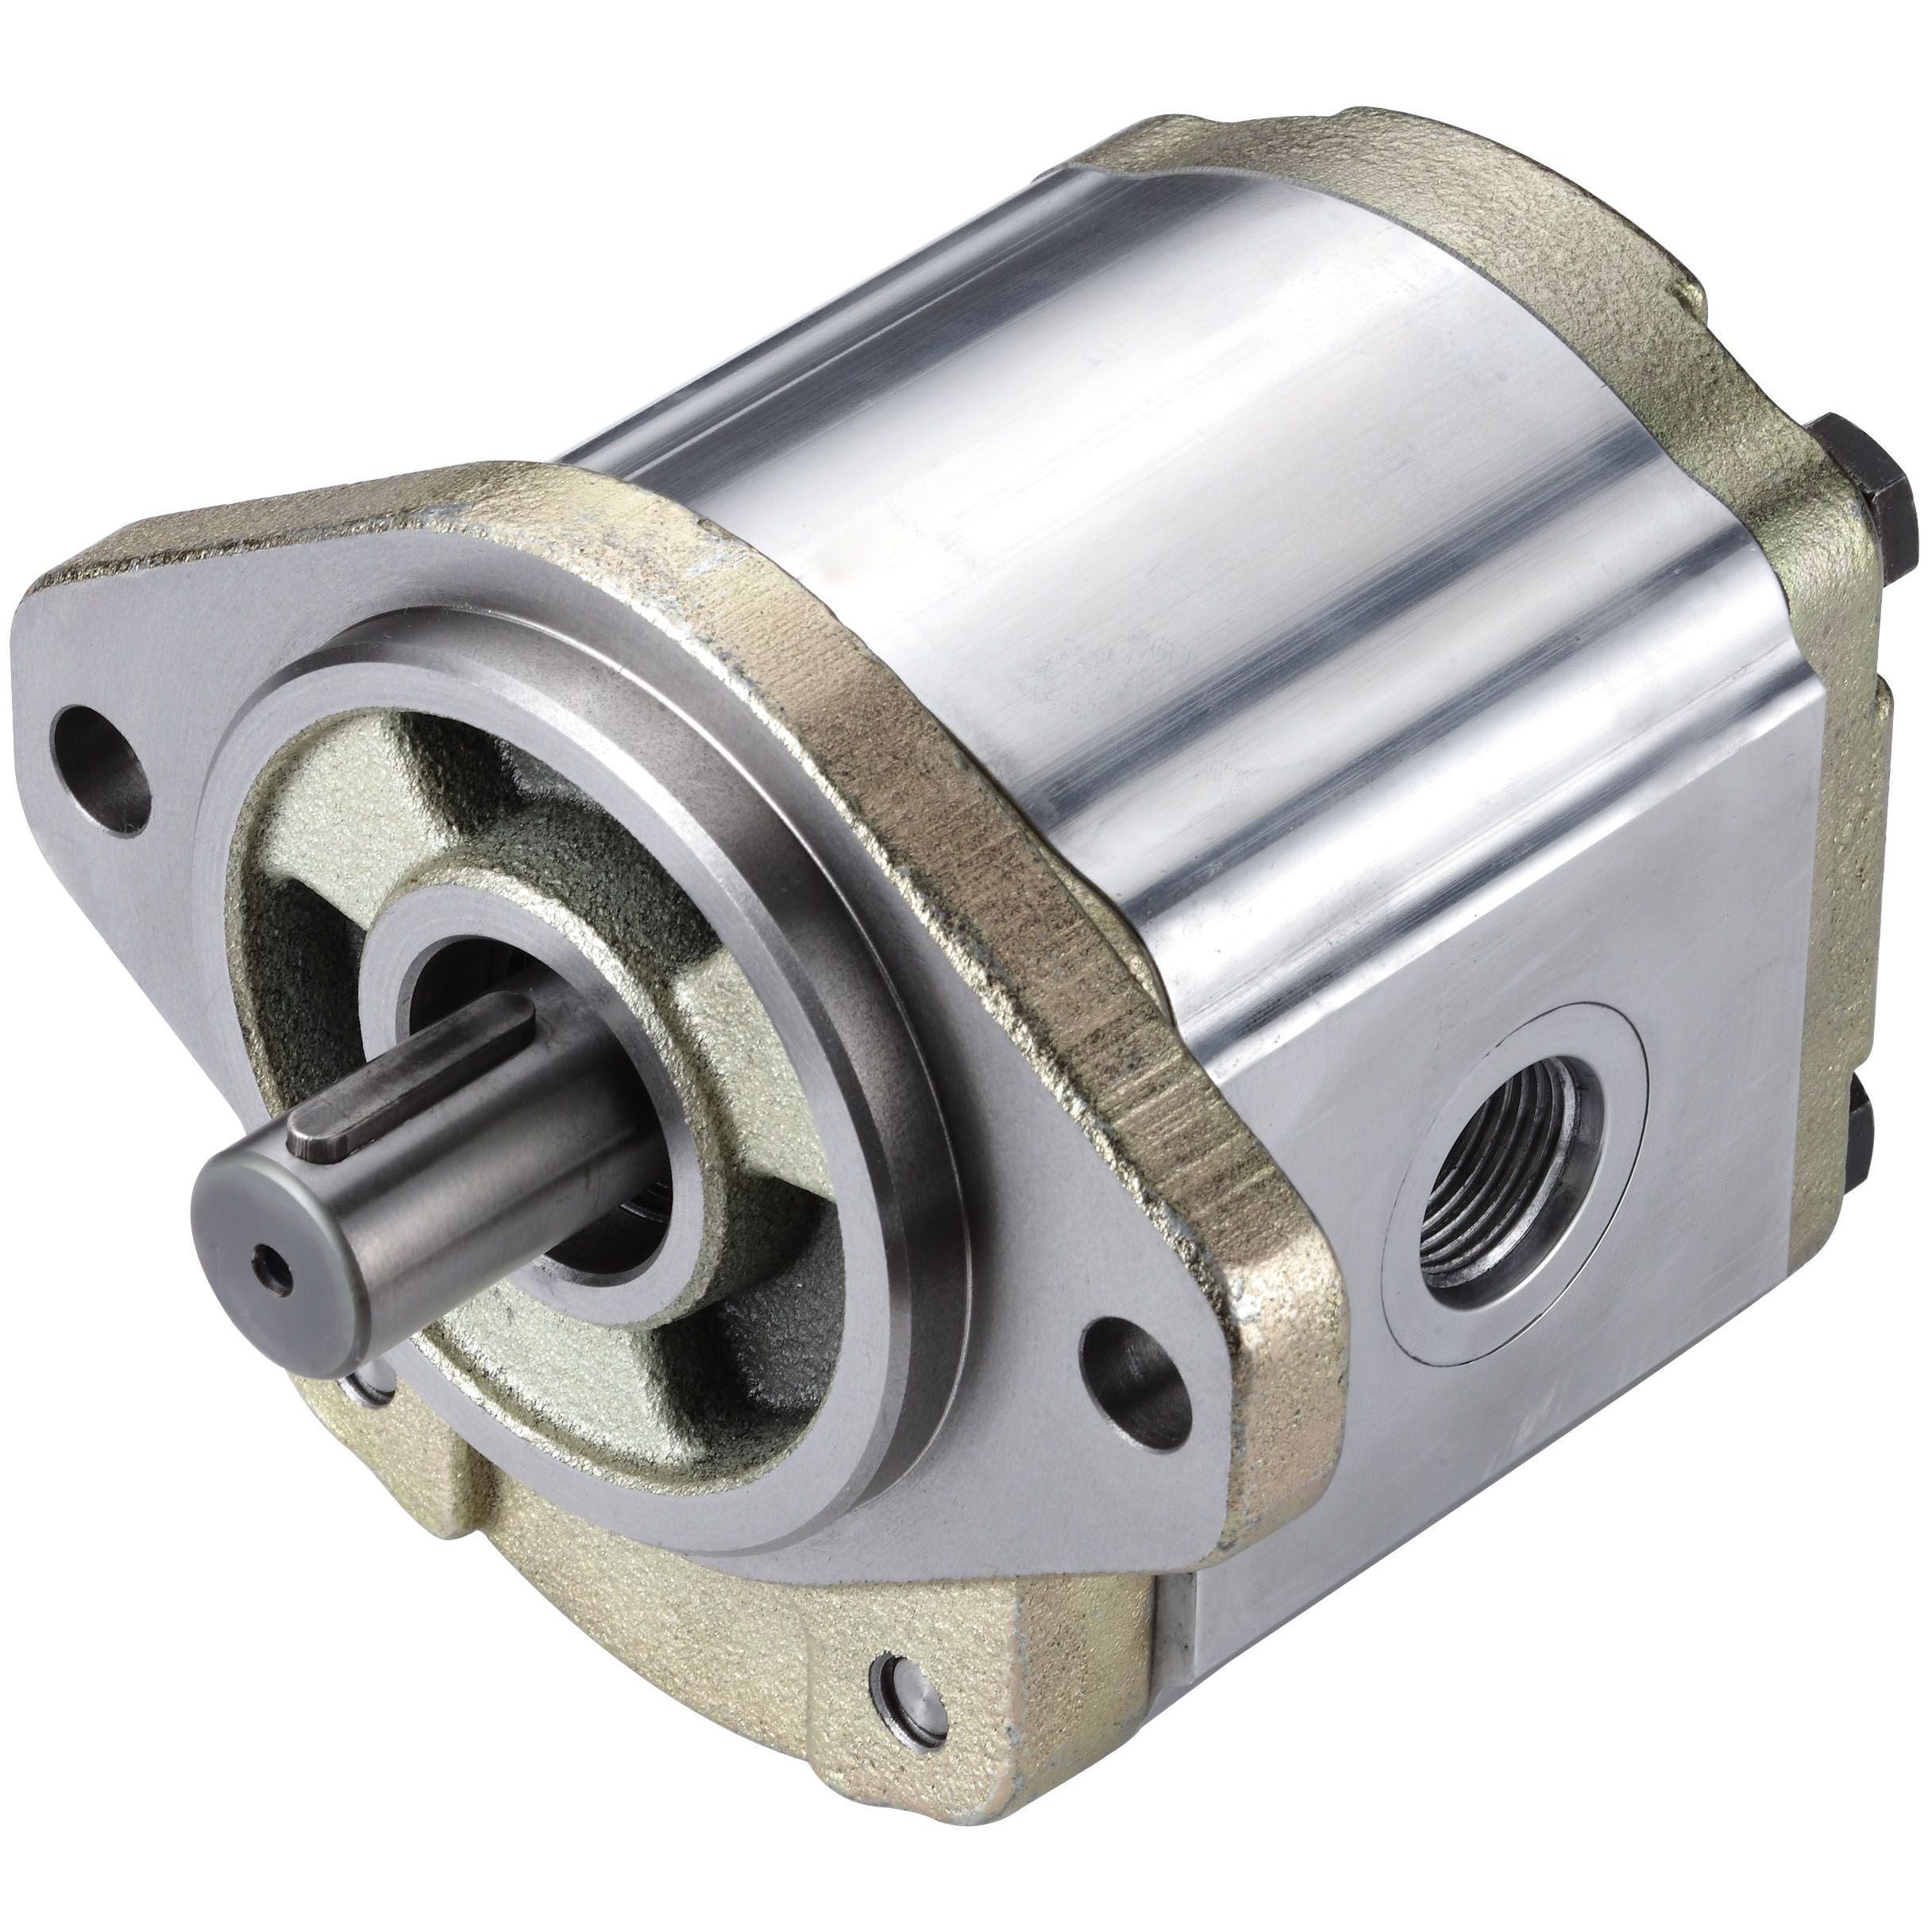 3GB8ZU370R : Honor Gear Pump, CW Rotation, 70cc (4.27in3), 33.29 GPM, 2300psi, 2500 RPM, #20 SAE (1.25") In, #16 SAE (1") Out, Splined Shaft 13-Tooth, 16/32 Pitch, SAE B 2-Bolt Mount